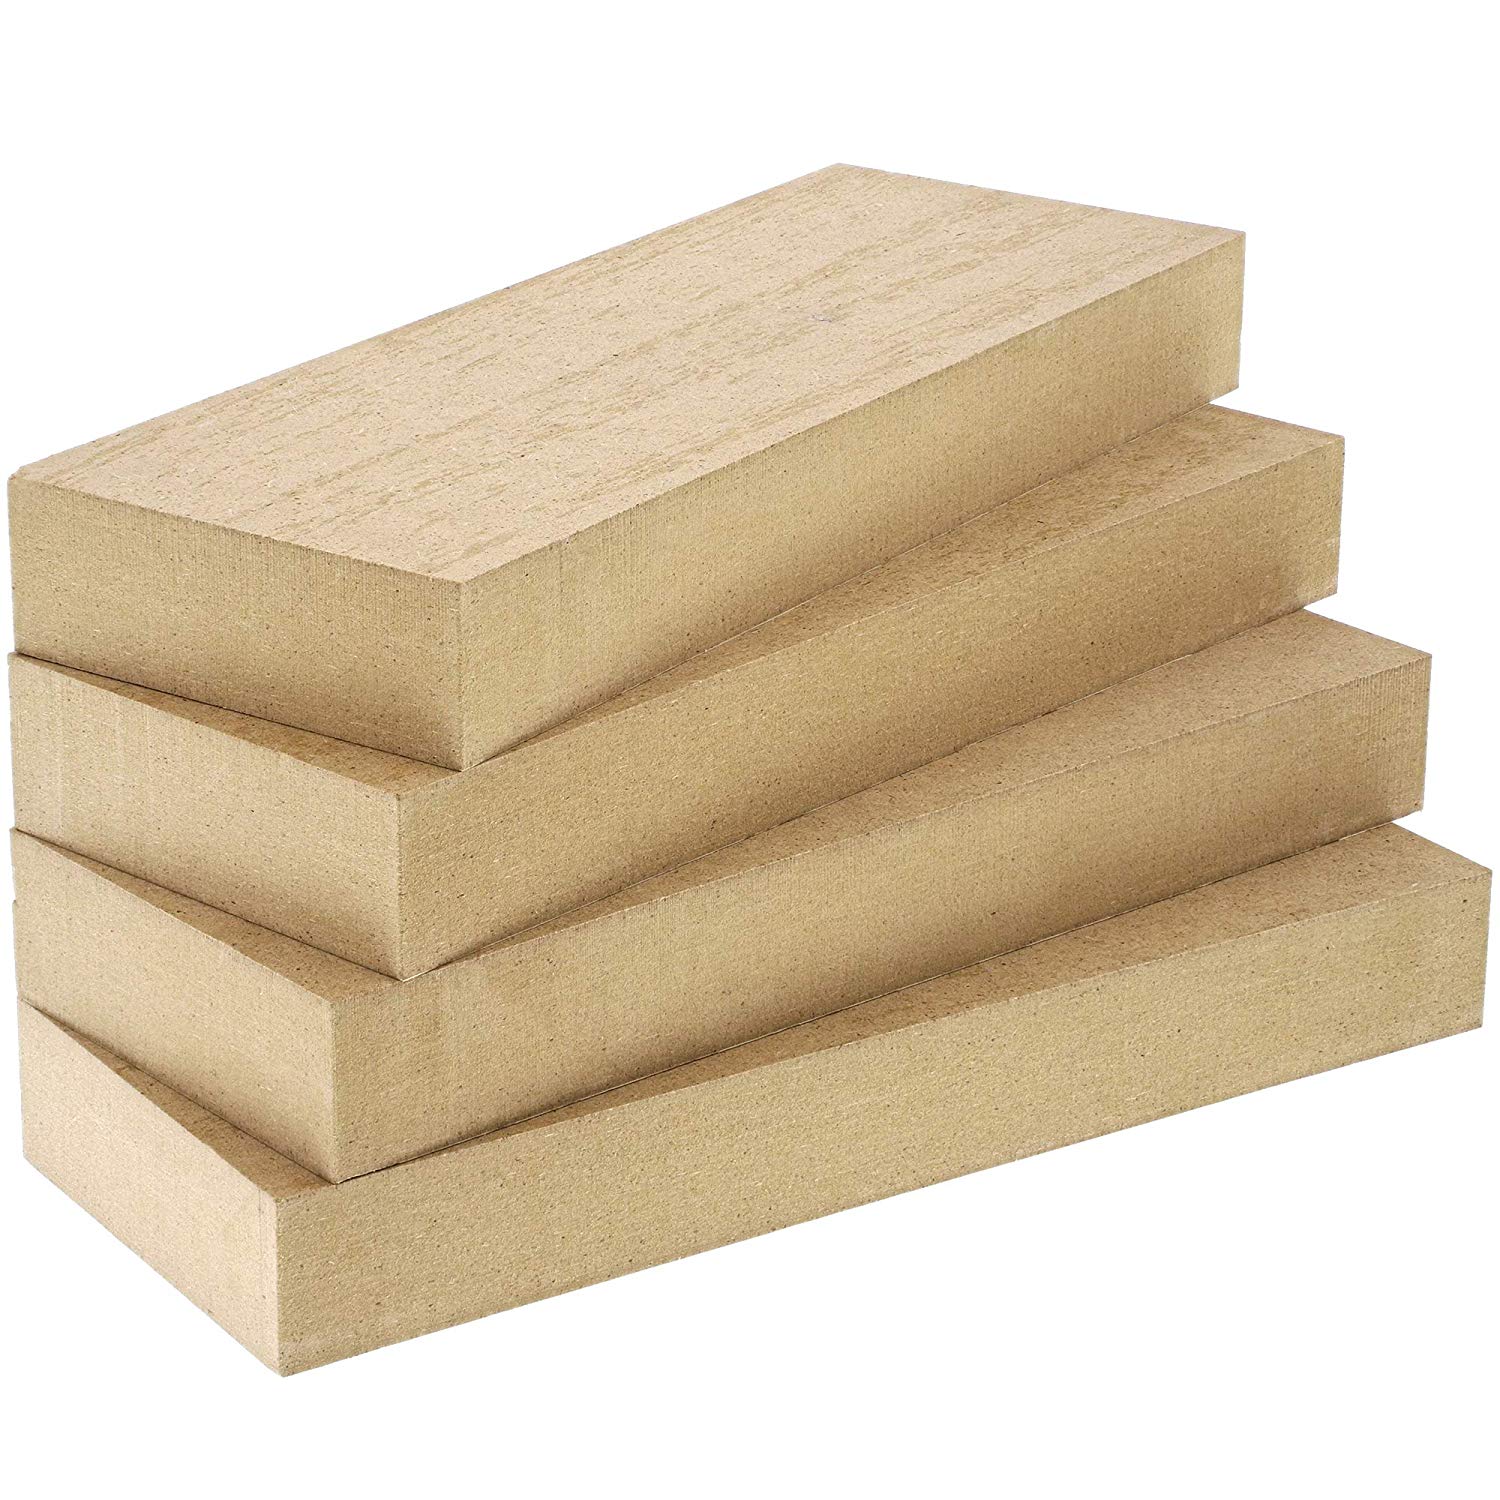 Unfinished MDF Wood Squares for Arts and Crafts, 1 Inch Thick (6x6